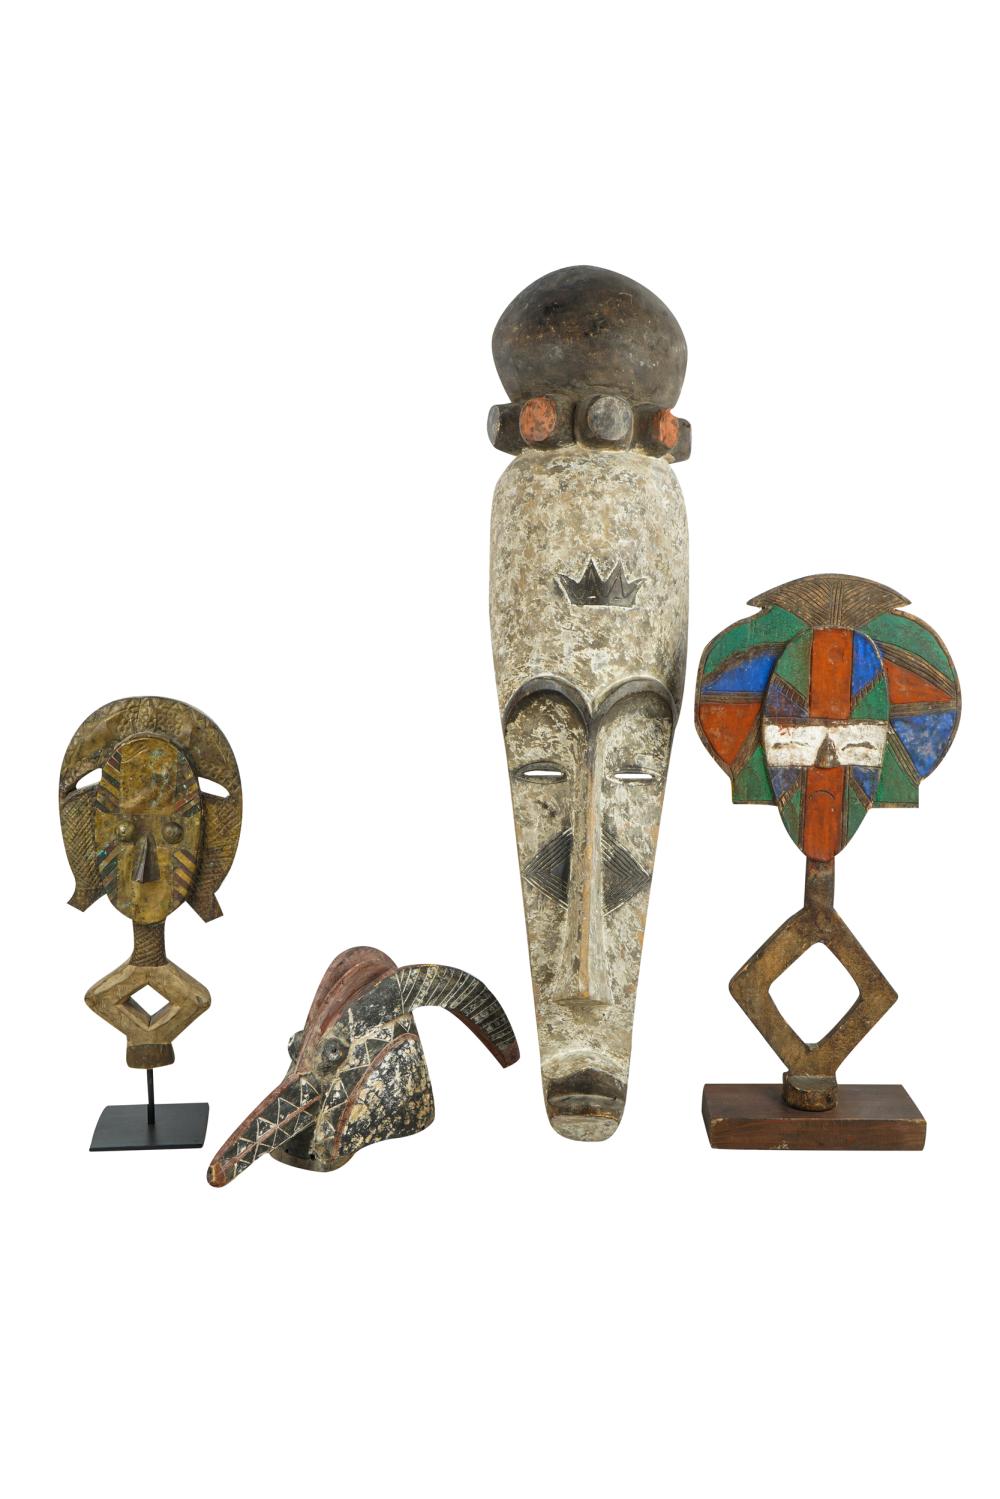 GROUP OF FOUR AFRICAN CARVINGScomprising 33264e